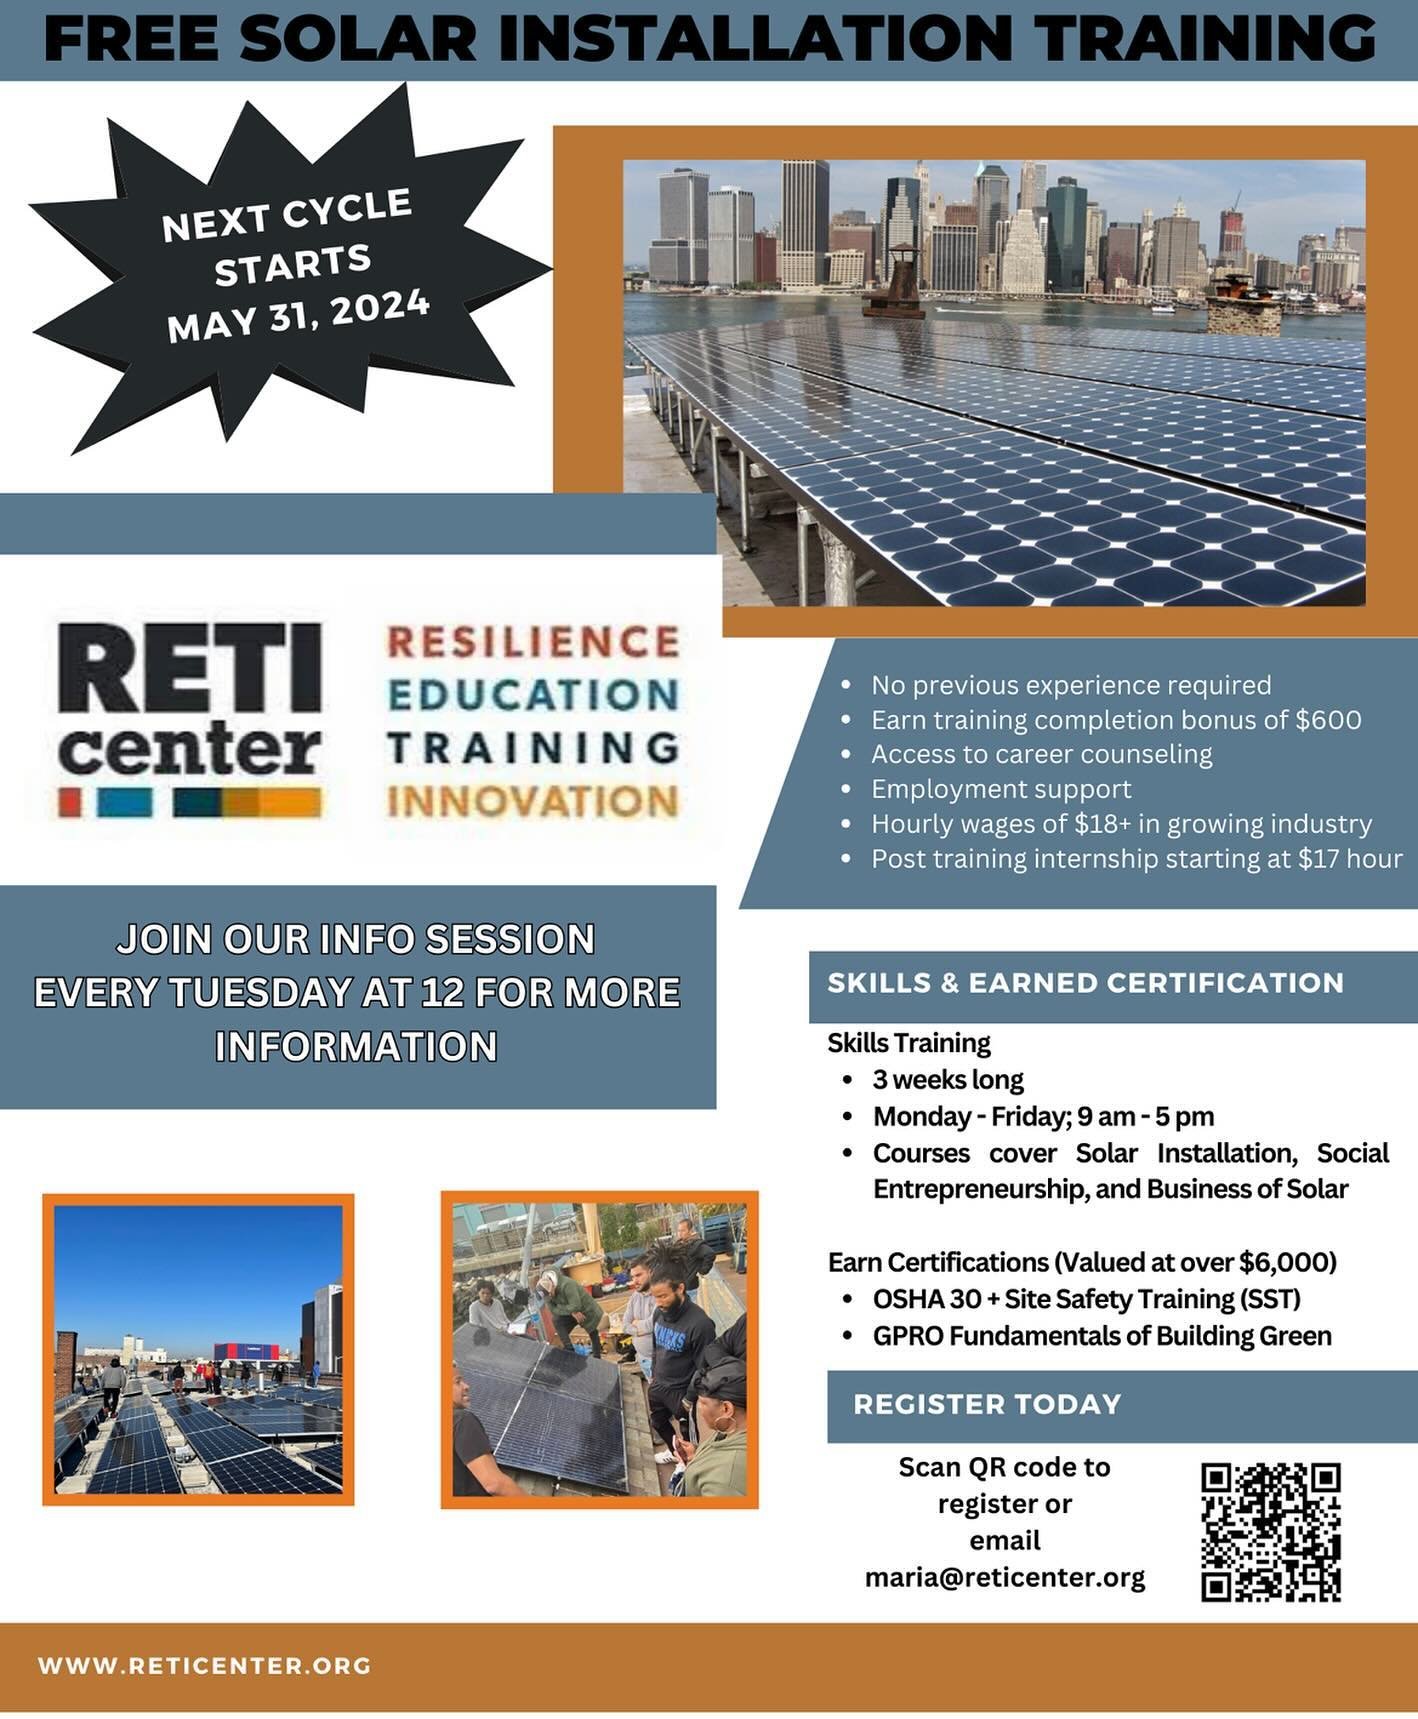 Are you interested in our FREE Solar Training? Registration is now open for our June cycle.
.
.
.
.
.
Trainees will receive:
OSHA-30 
OSHA-10 SST
GPRO Fundamentals of Building Green
Roof RETI Solar Installation training
Metro Cards 
Lunch 
Completion